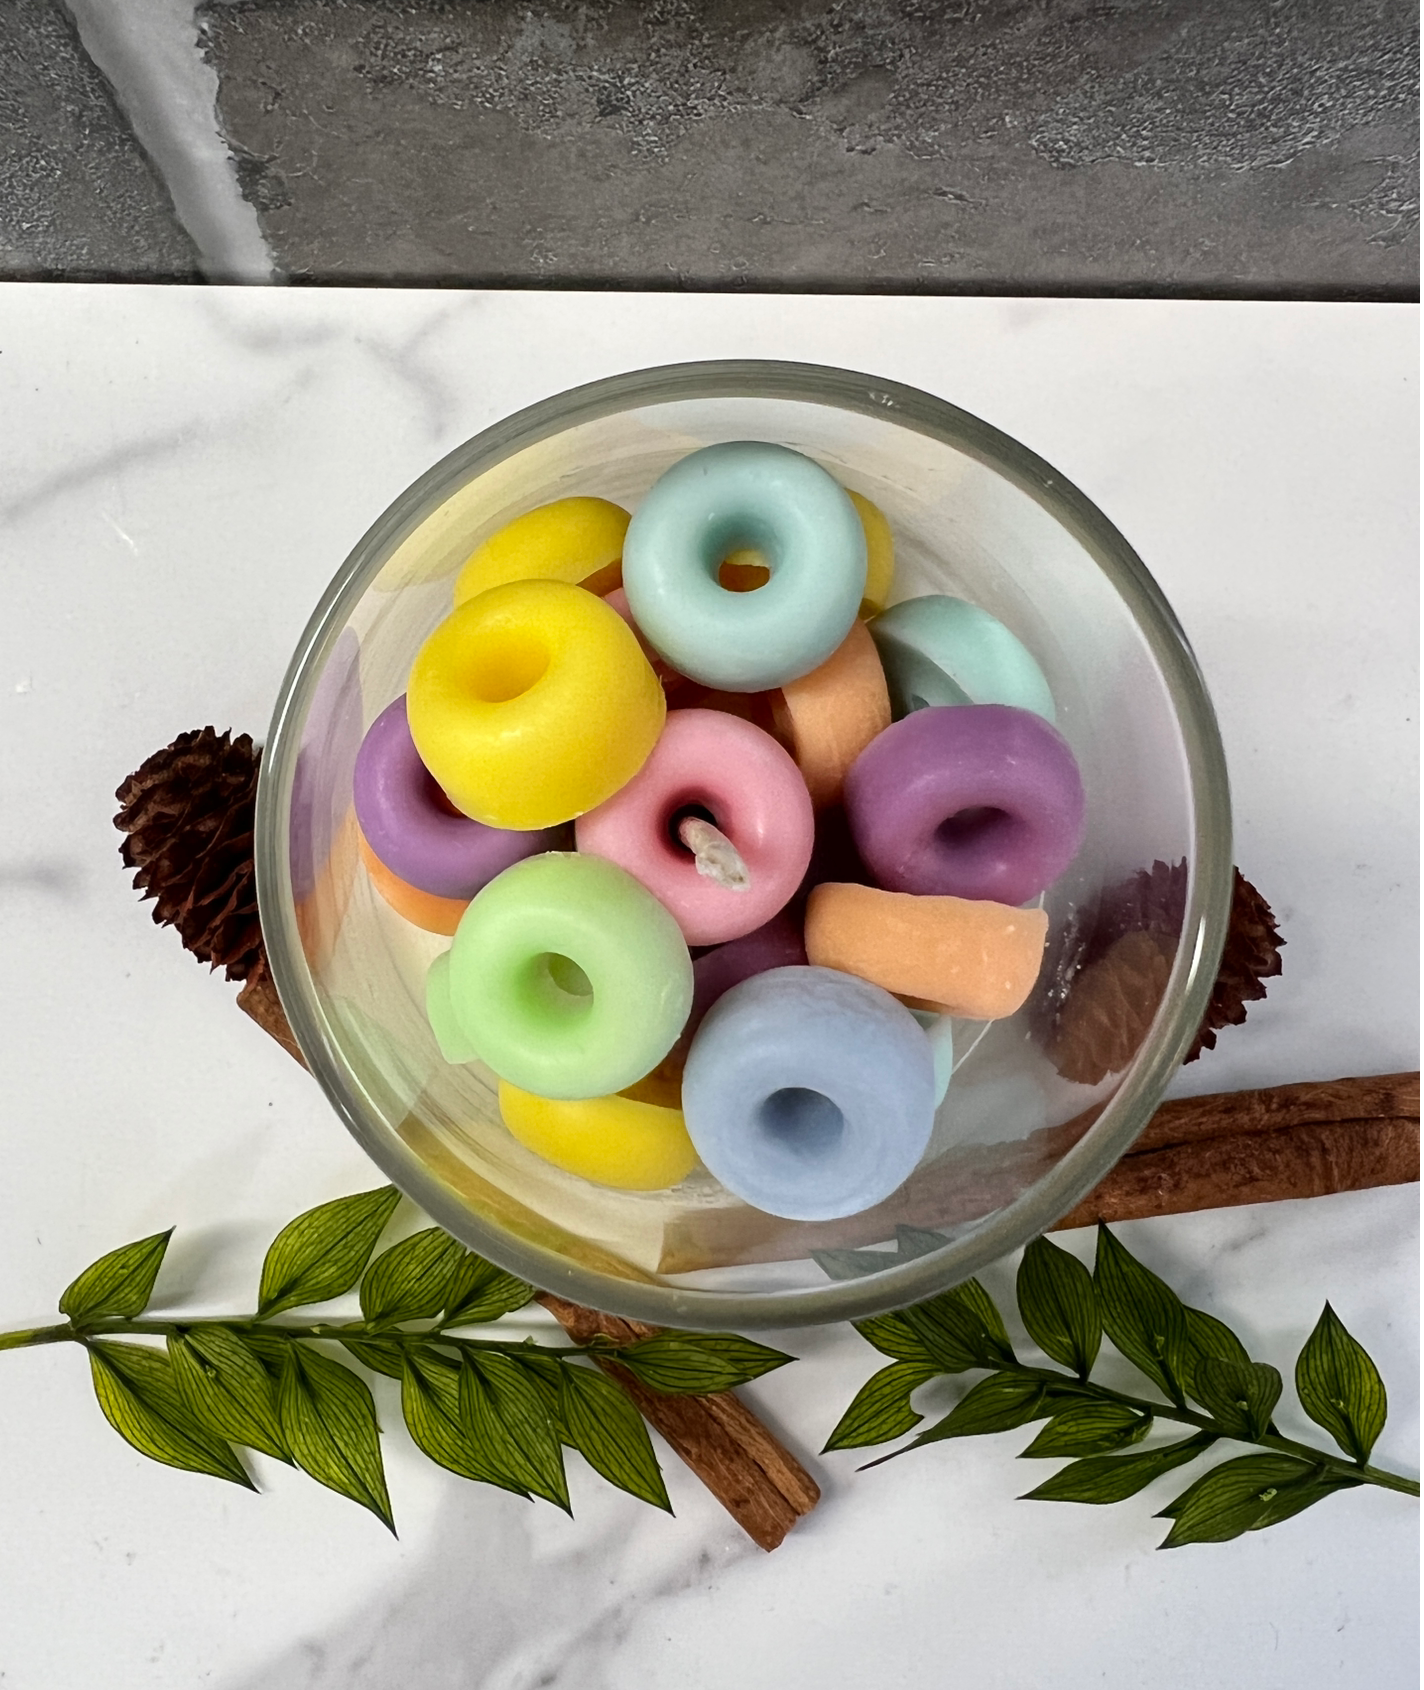 DONUT CANDLE